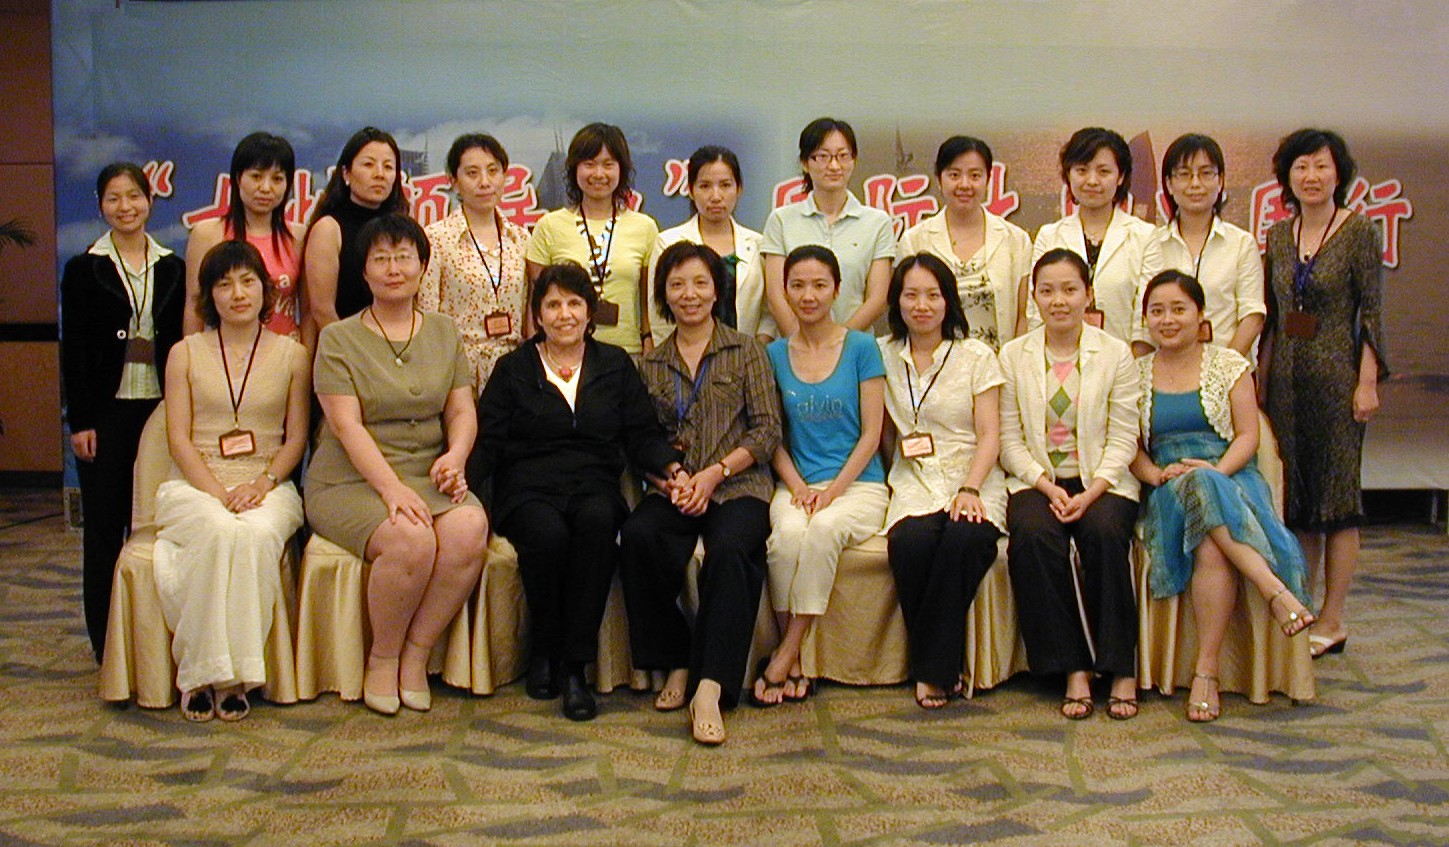 Copy of Copy of Participants Women's Leadership Conference Shanghai